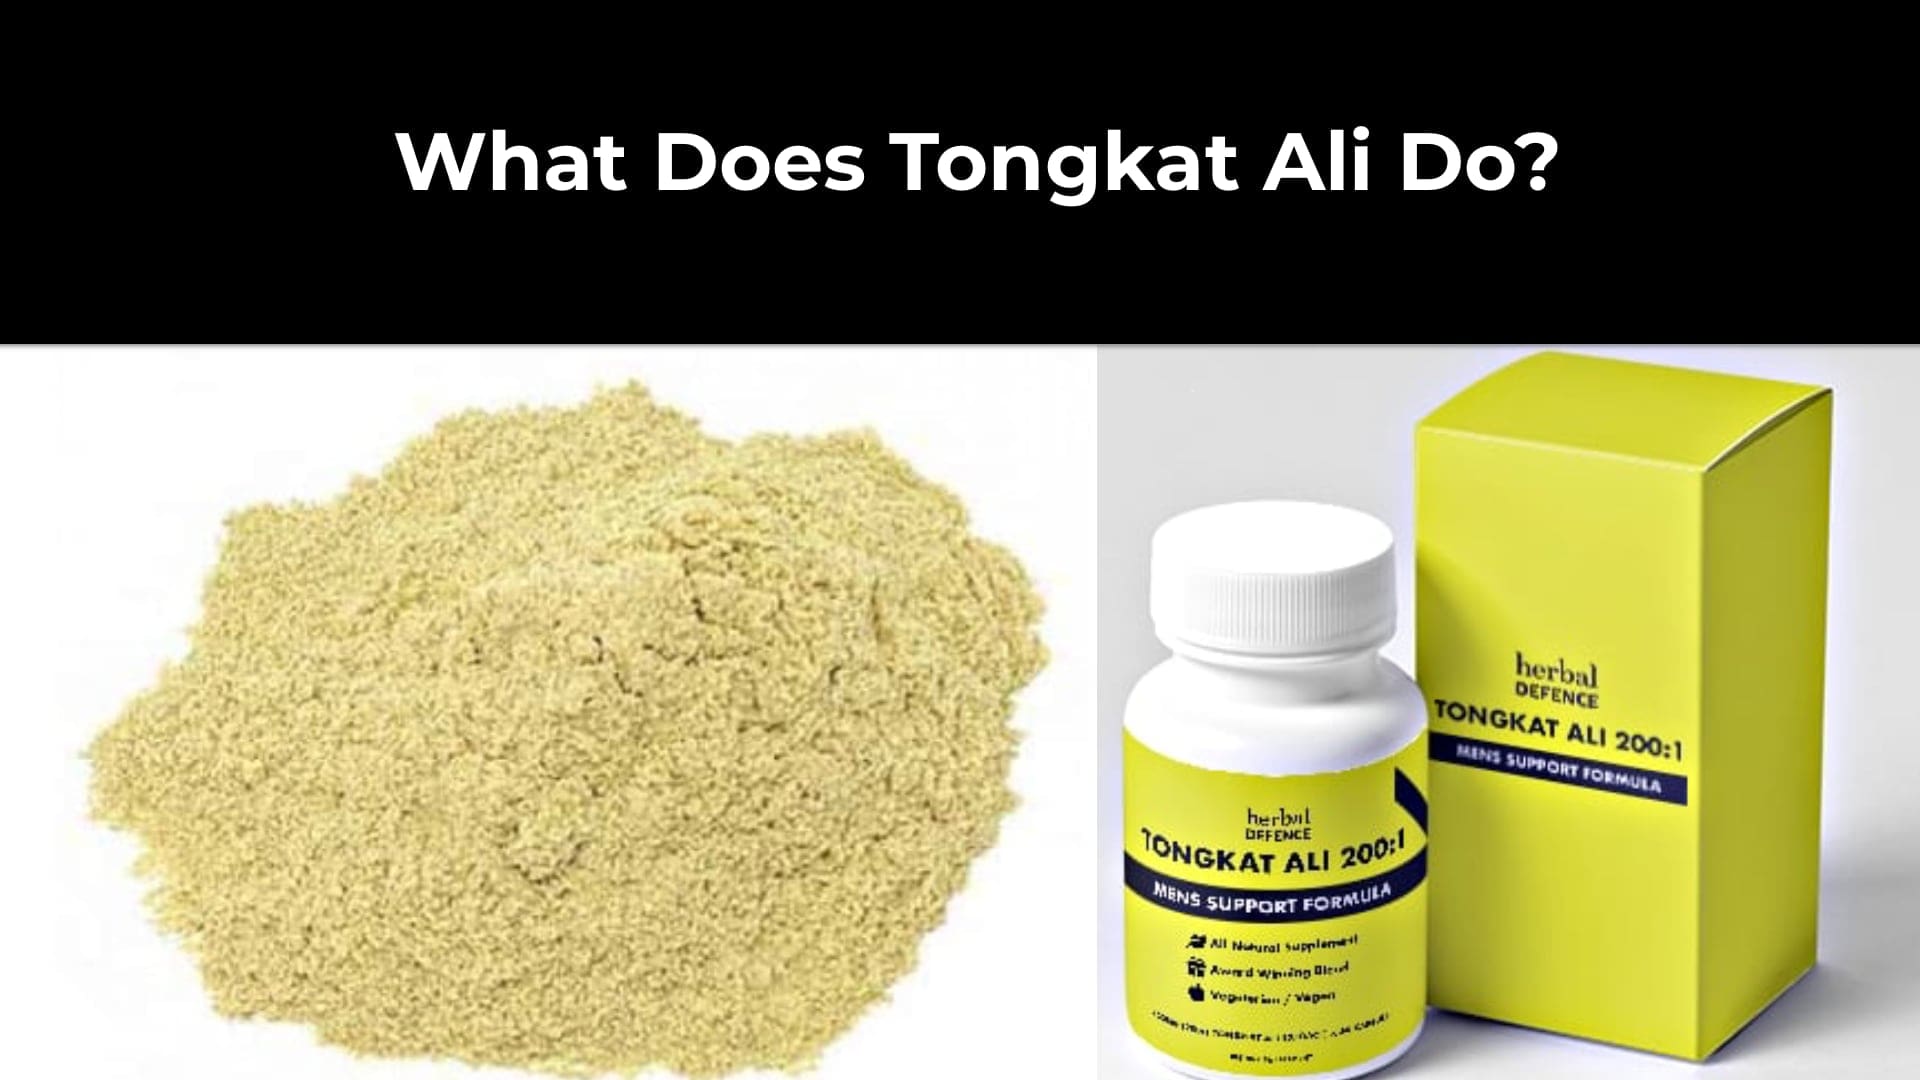 What Does Tongkat Ali Do?